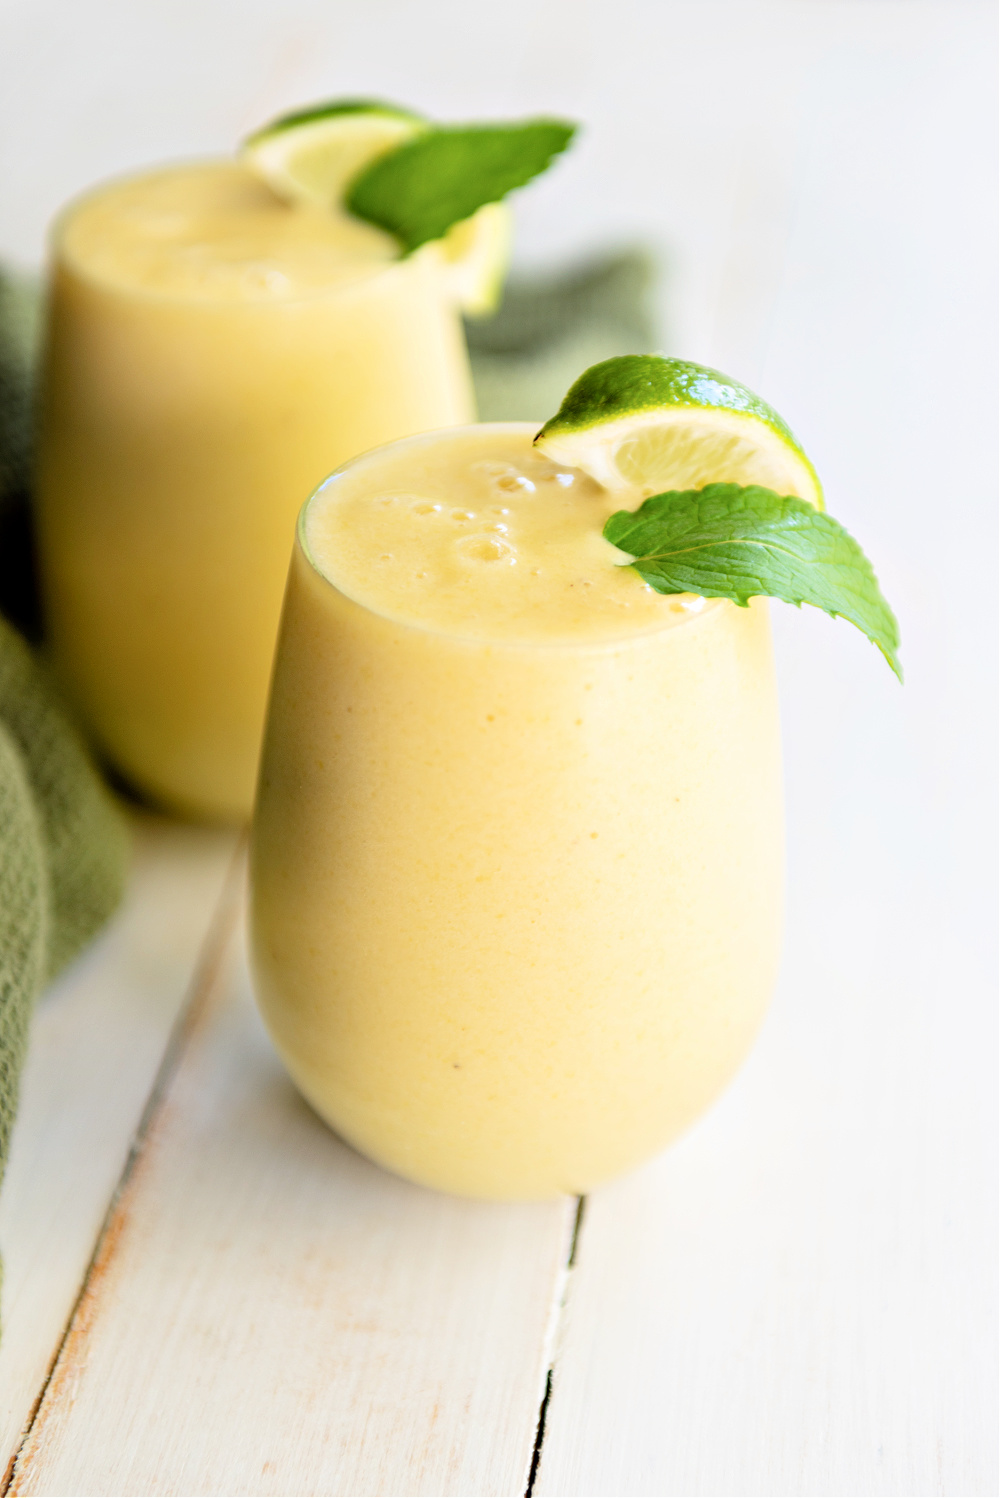 Mango Pineapple Smoothie in a glass with garnish